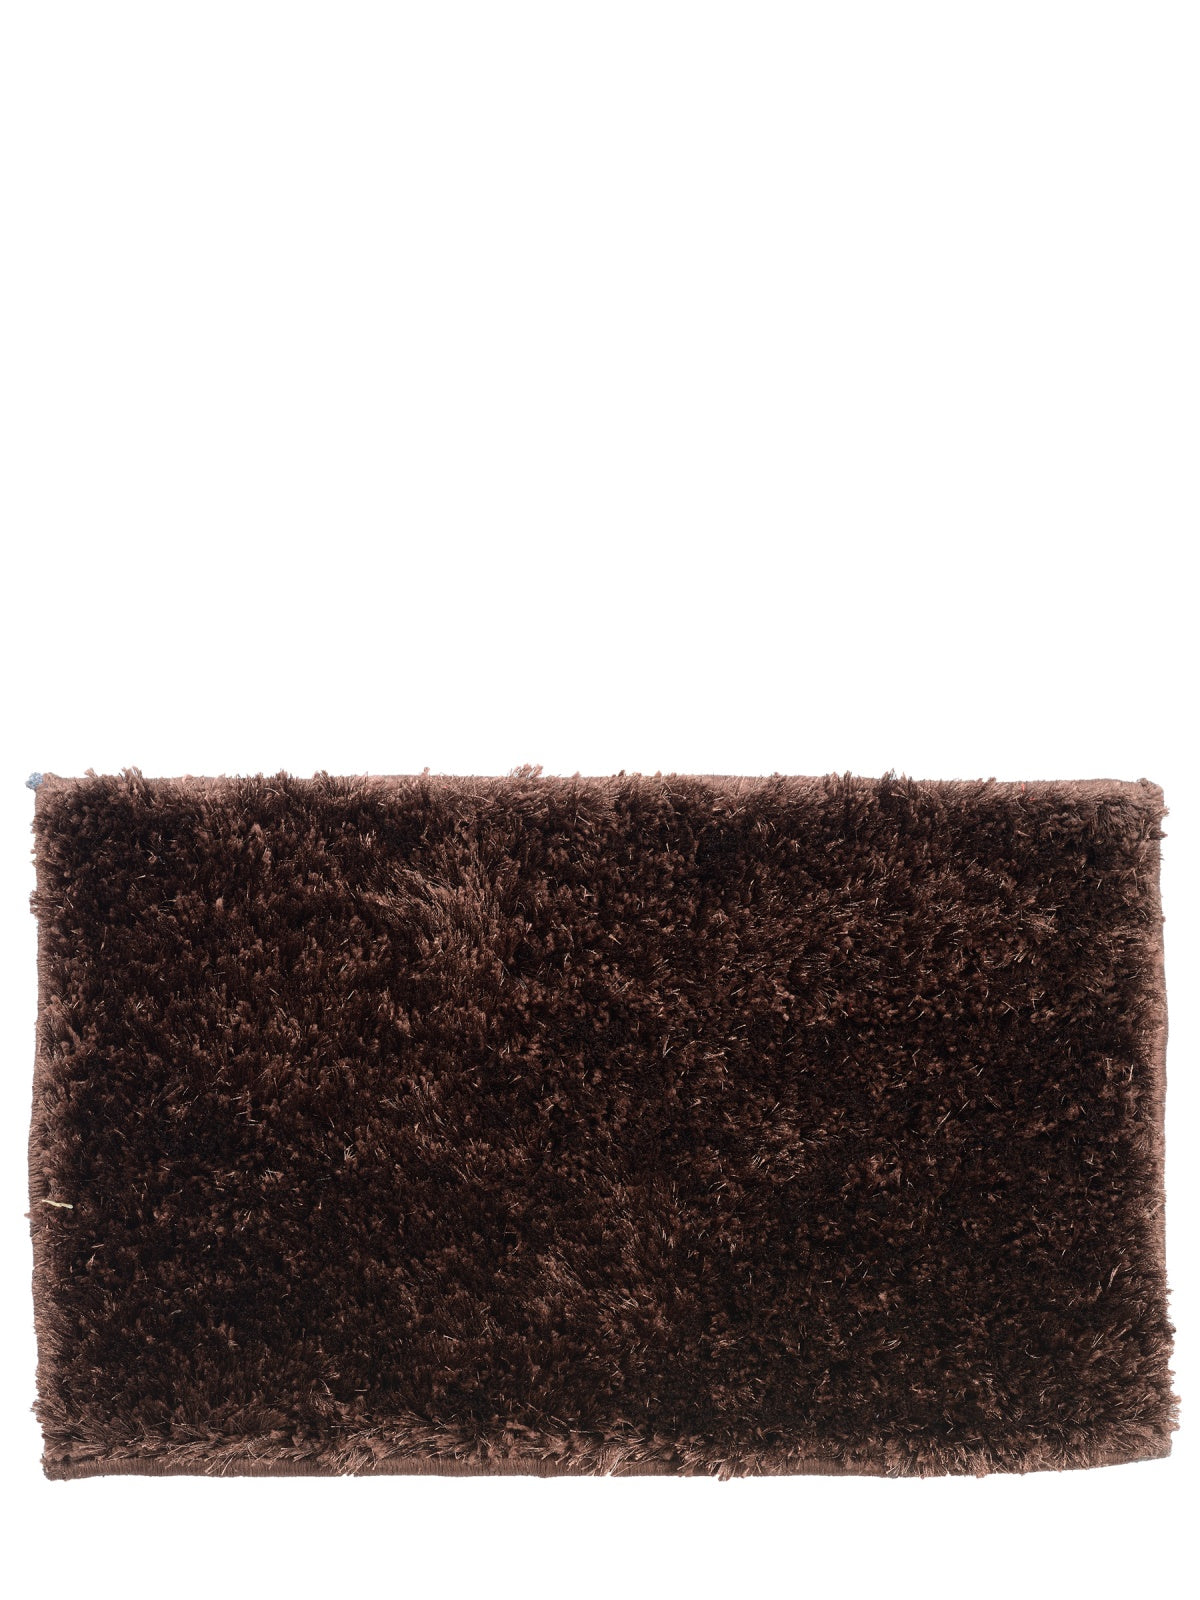 Brown Solids Patterned Doormat, 16 Inch x 24 Inch